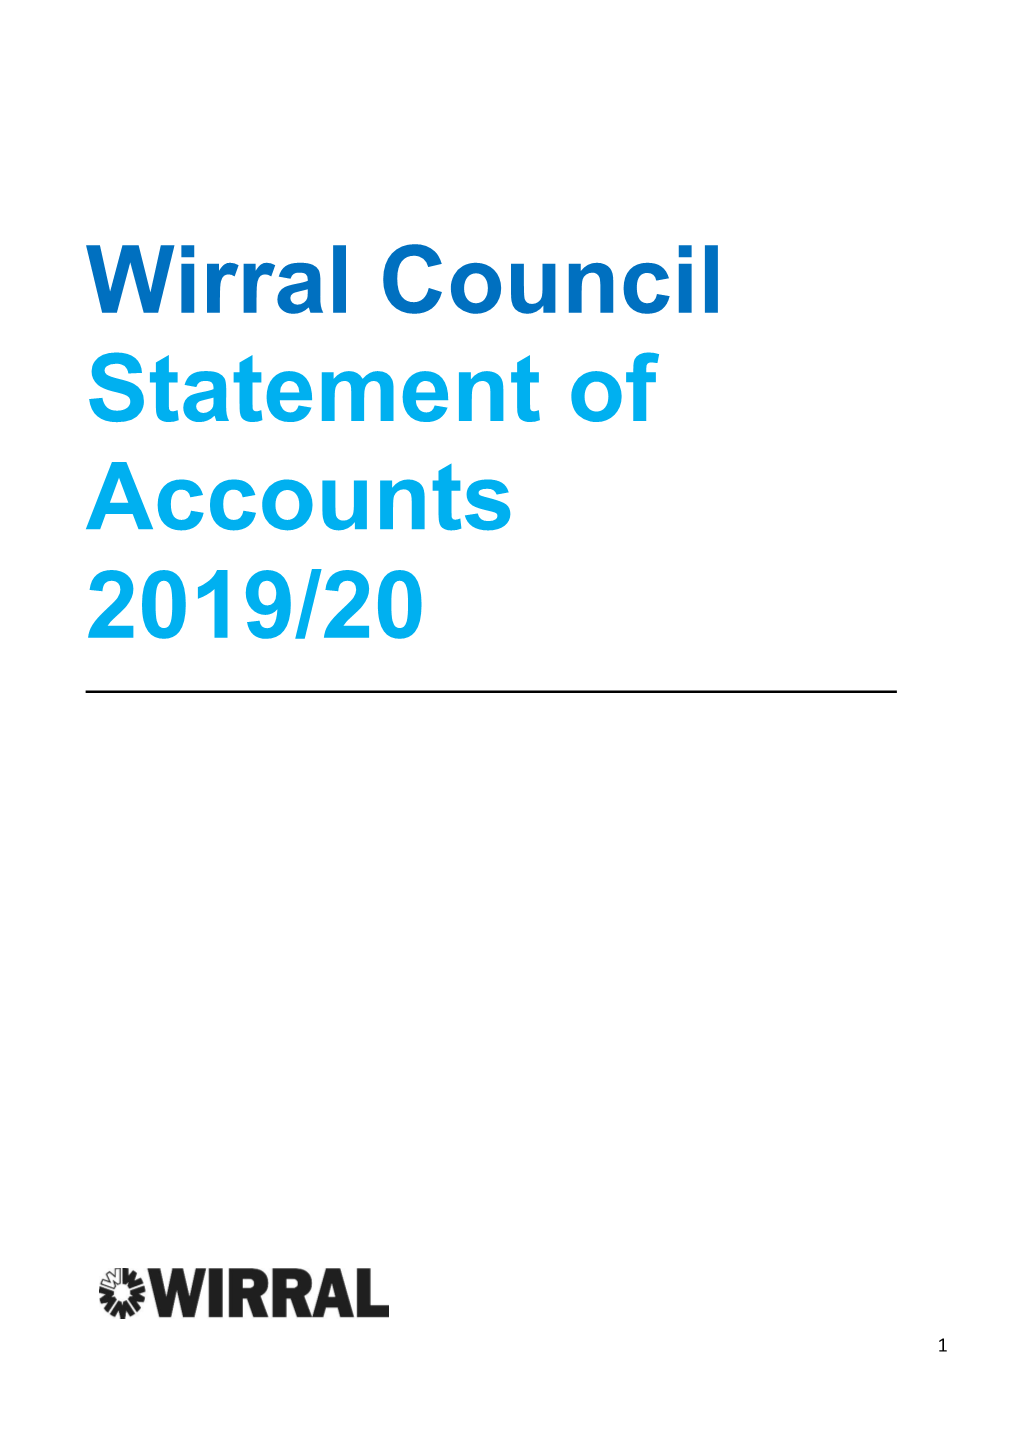 Wirral Council Statement of Accounts 2019/20